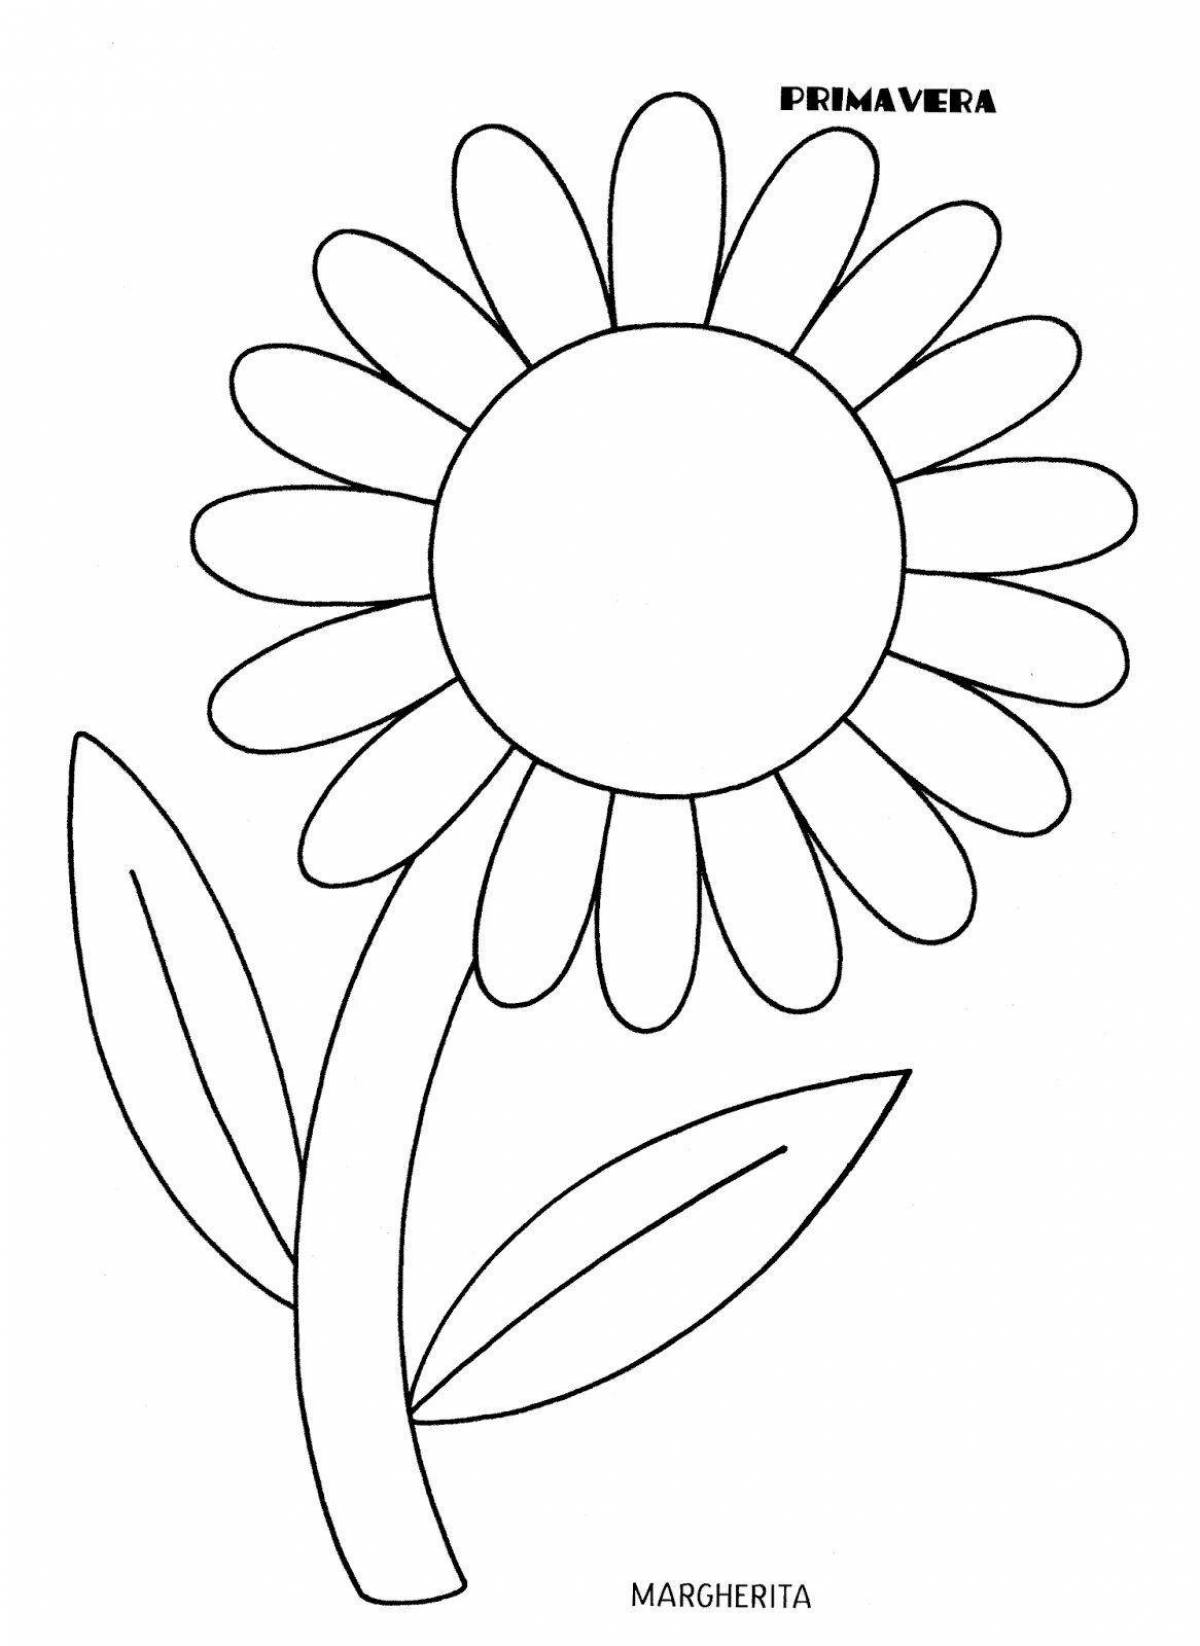 Coloring book sophisticated chamomile pattern